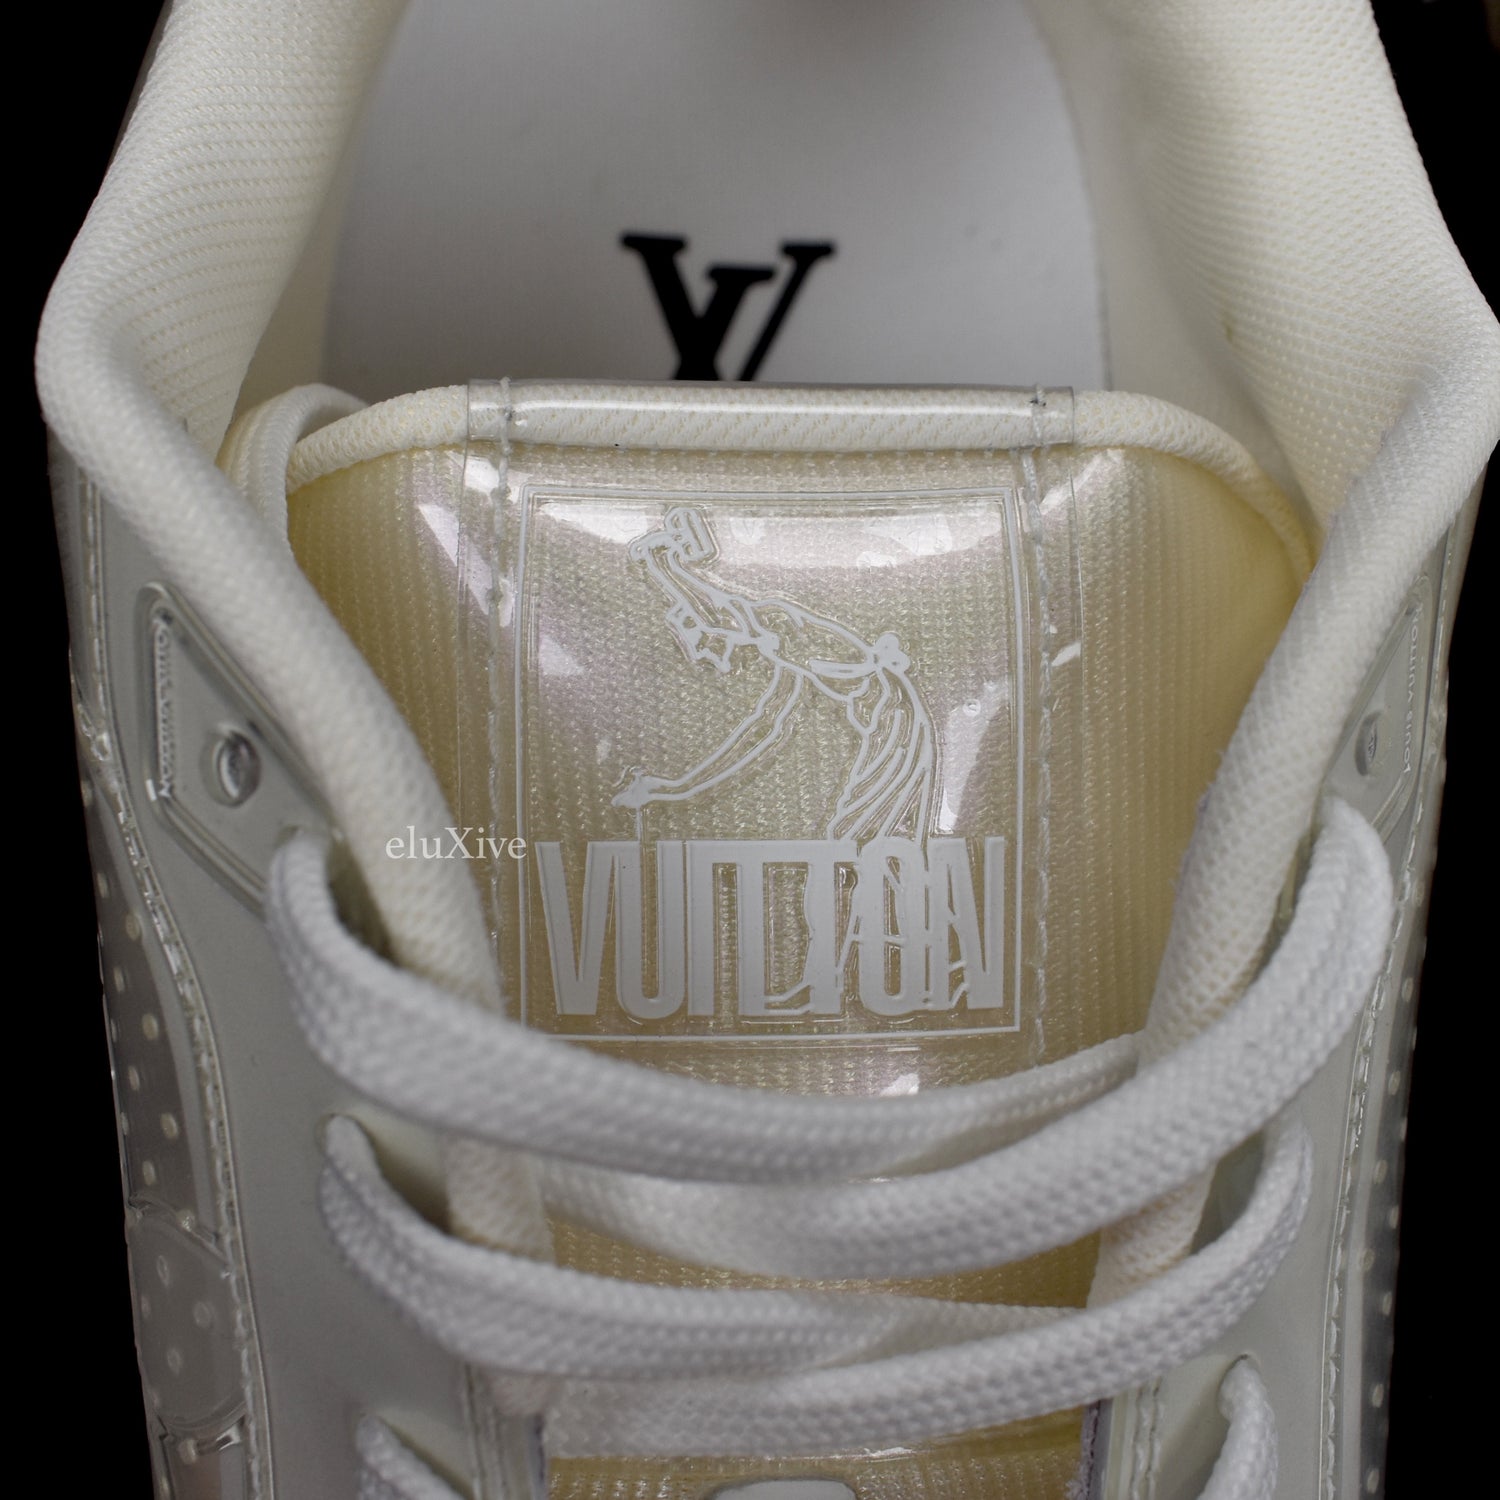 Louis Vuitton White/Transparent PVC and Leather Low Top Sneakers